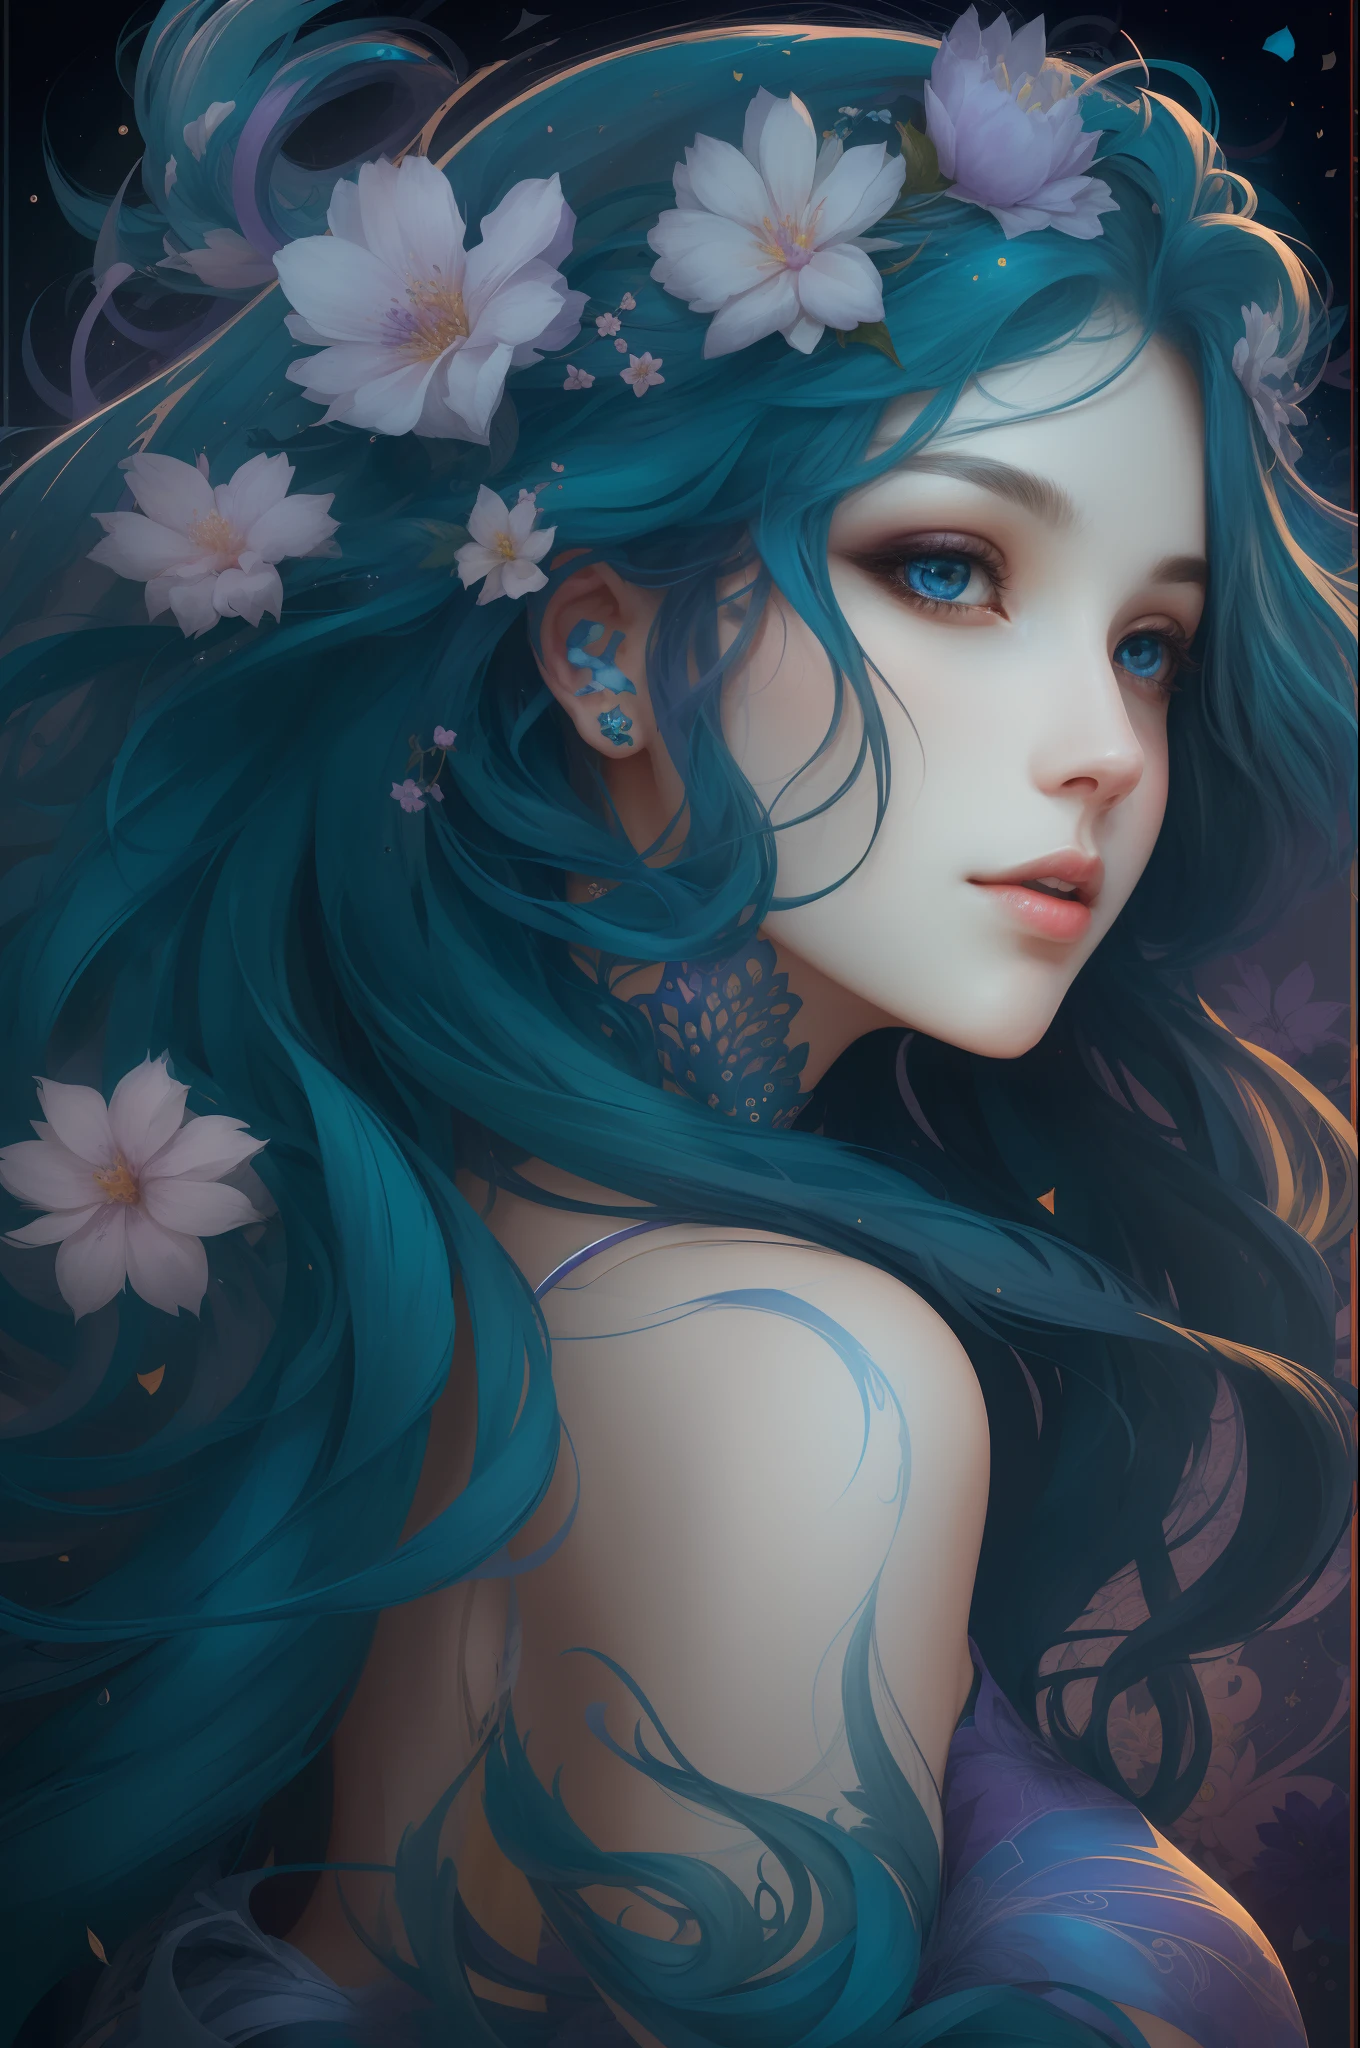 （（Gorgeous 18-year-old princess）），（She has long flowing blue-purple hair），（Bright and beautiful eyes），trendding on artstation，Flowers of hope，ultra-detailliert，insanely details, Amazing, complex, elite, Art Nouveau, a gorgeous, Dreamy，Liquid wax, Luxurious, Ink style, a sticker, Vector art beautiful character design, Dual exposure shooting, Luminous design, winning artwork, tmasterpiece, AMOLED black background,optic